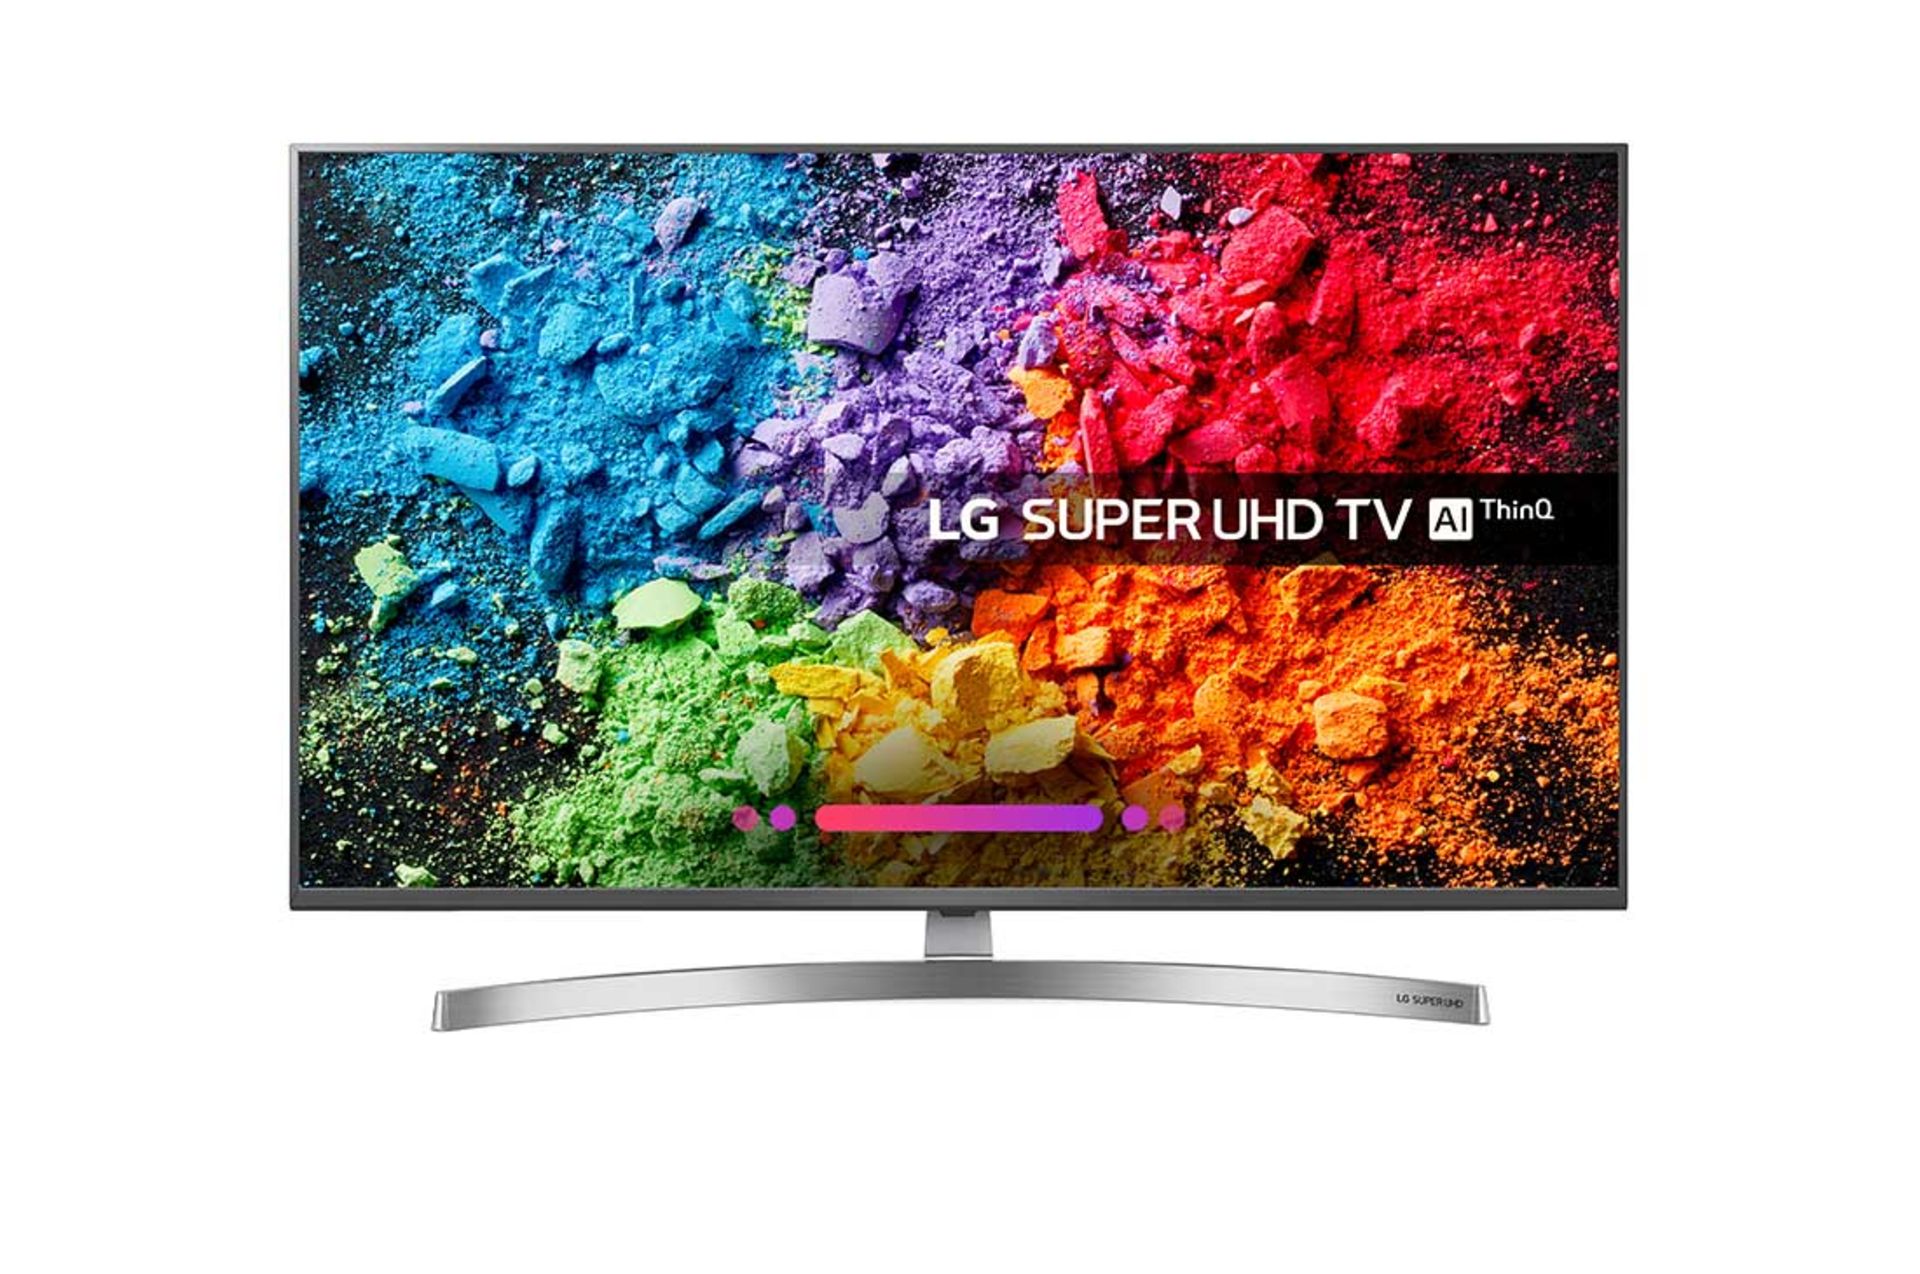 V Grade A LG 49 Inch ACTIVE HDR 4K SUPER ULTRA HD LED NANO CELL SMART TV WITH FREEVIEW HD & WEBOS